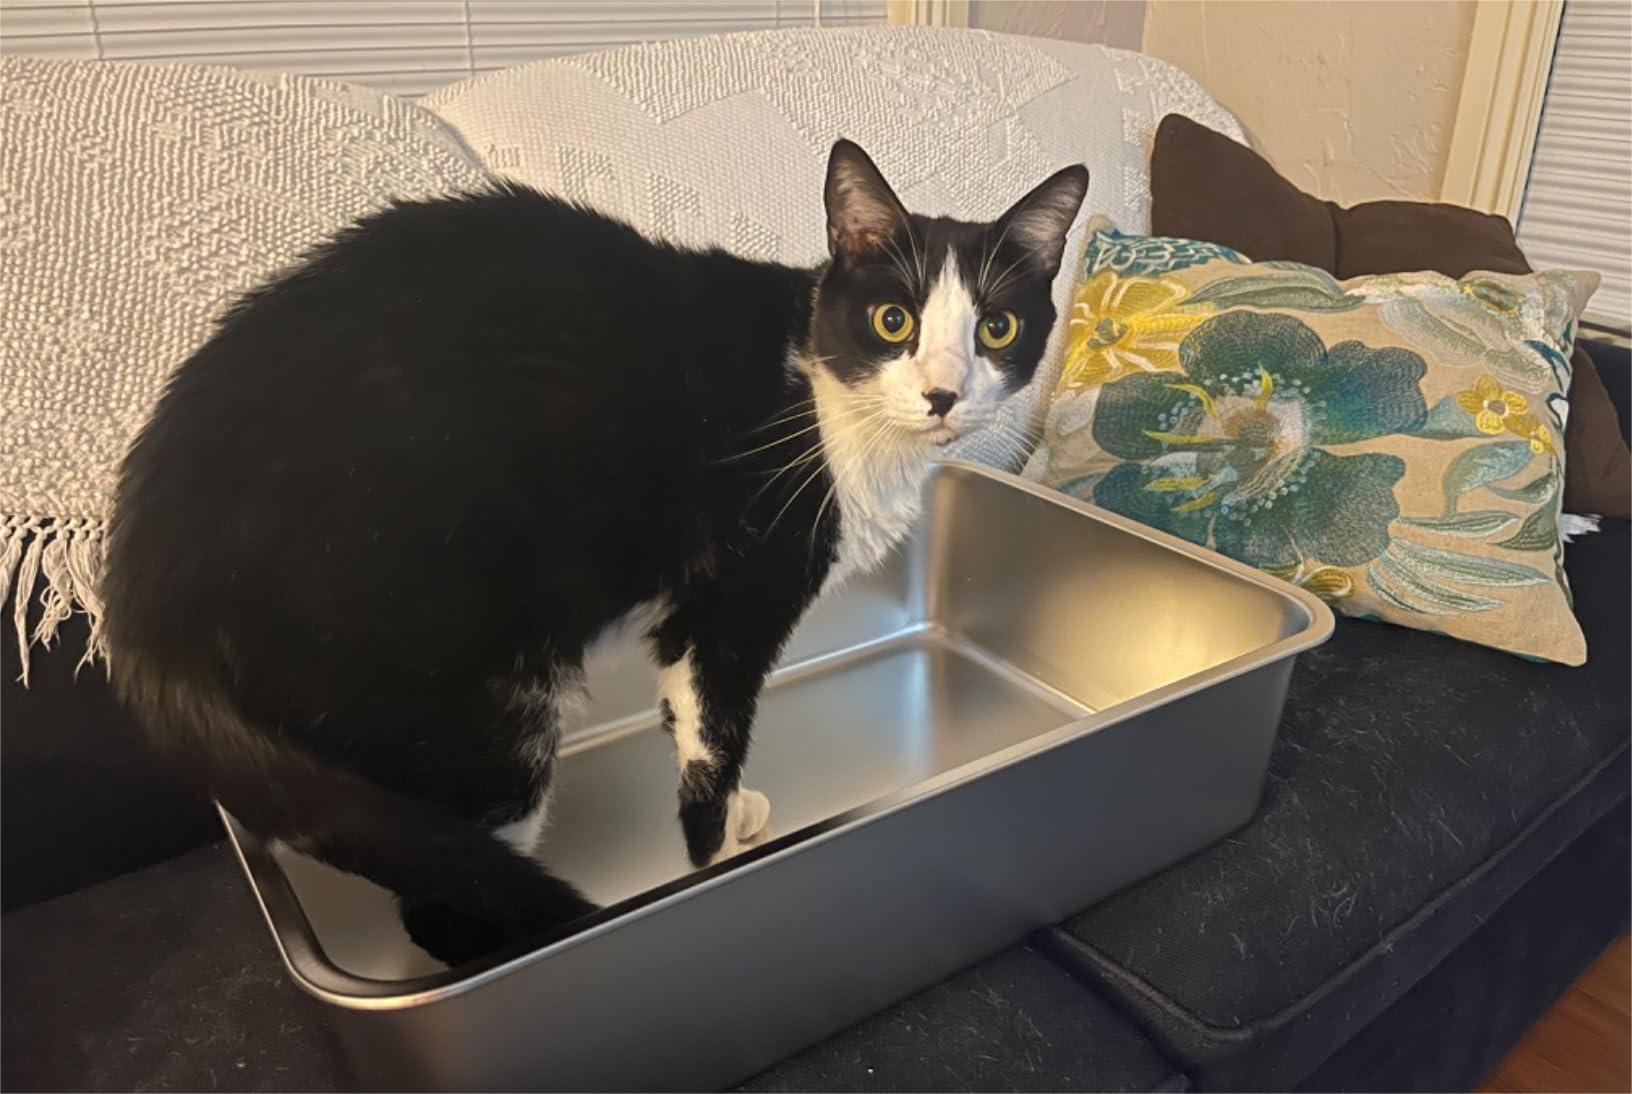 Troubleshooting Common Issues with Stainless Steel Litter Boxes